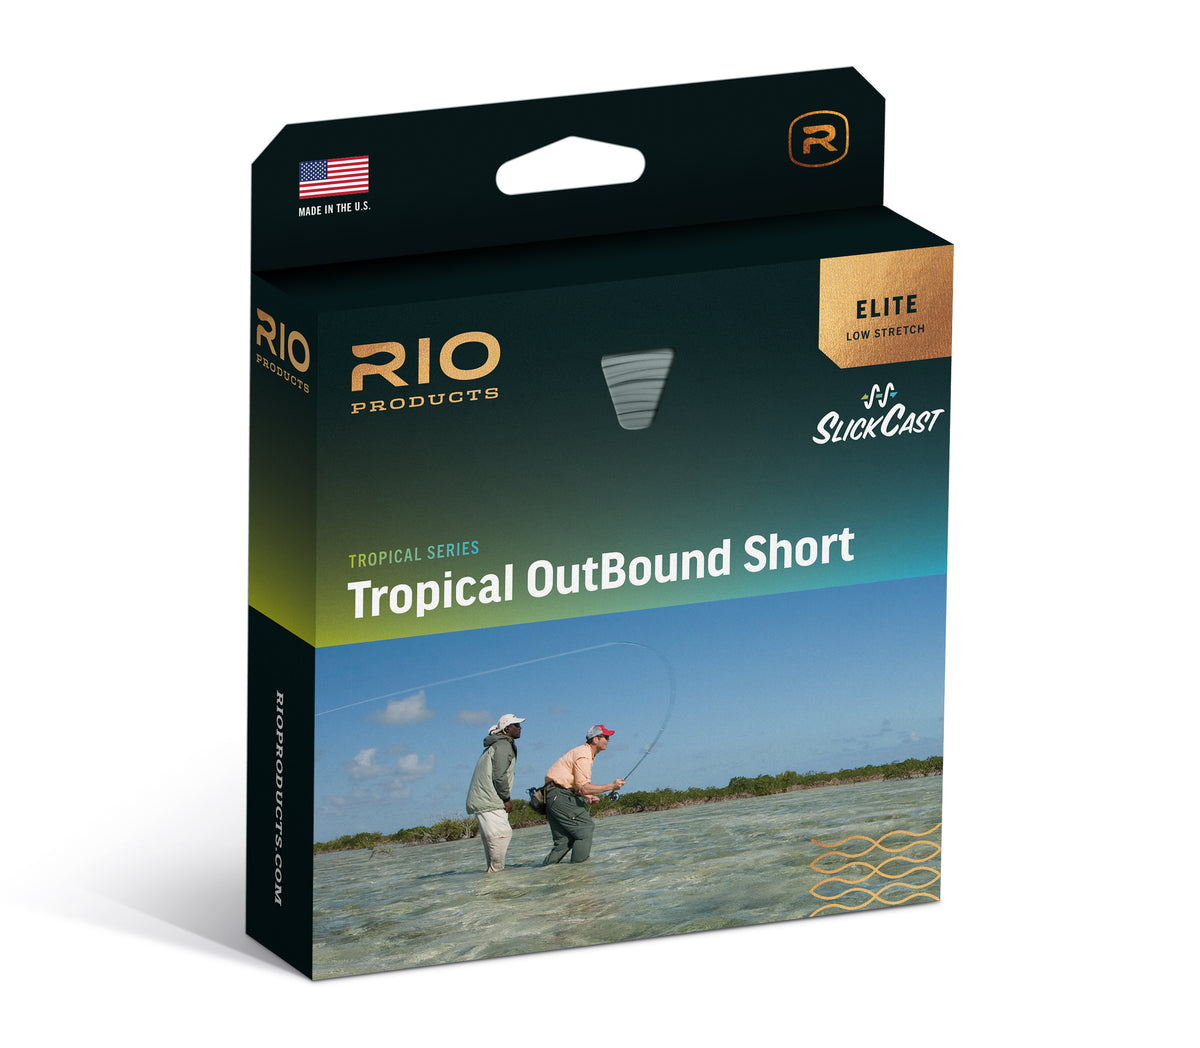 Rio Premier Outbound Short F/H/I Fly Line - All Sizes - FREE FAST SHIPPING